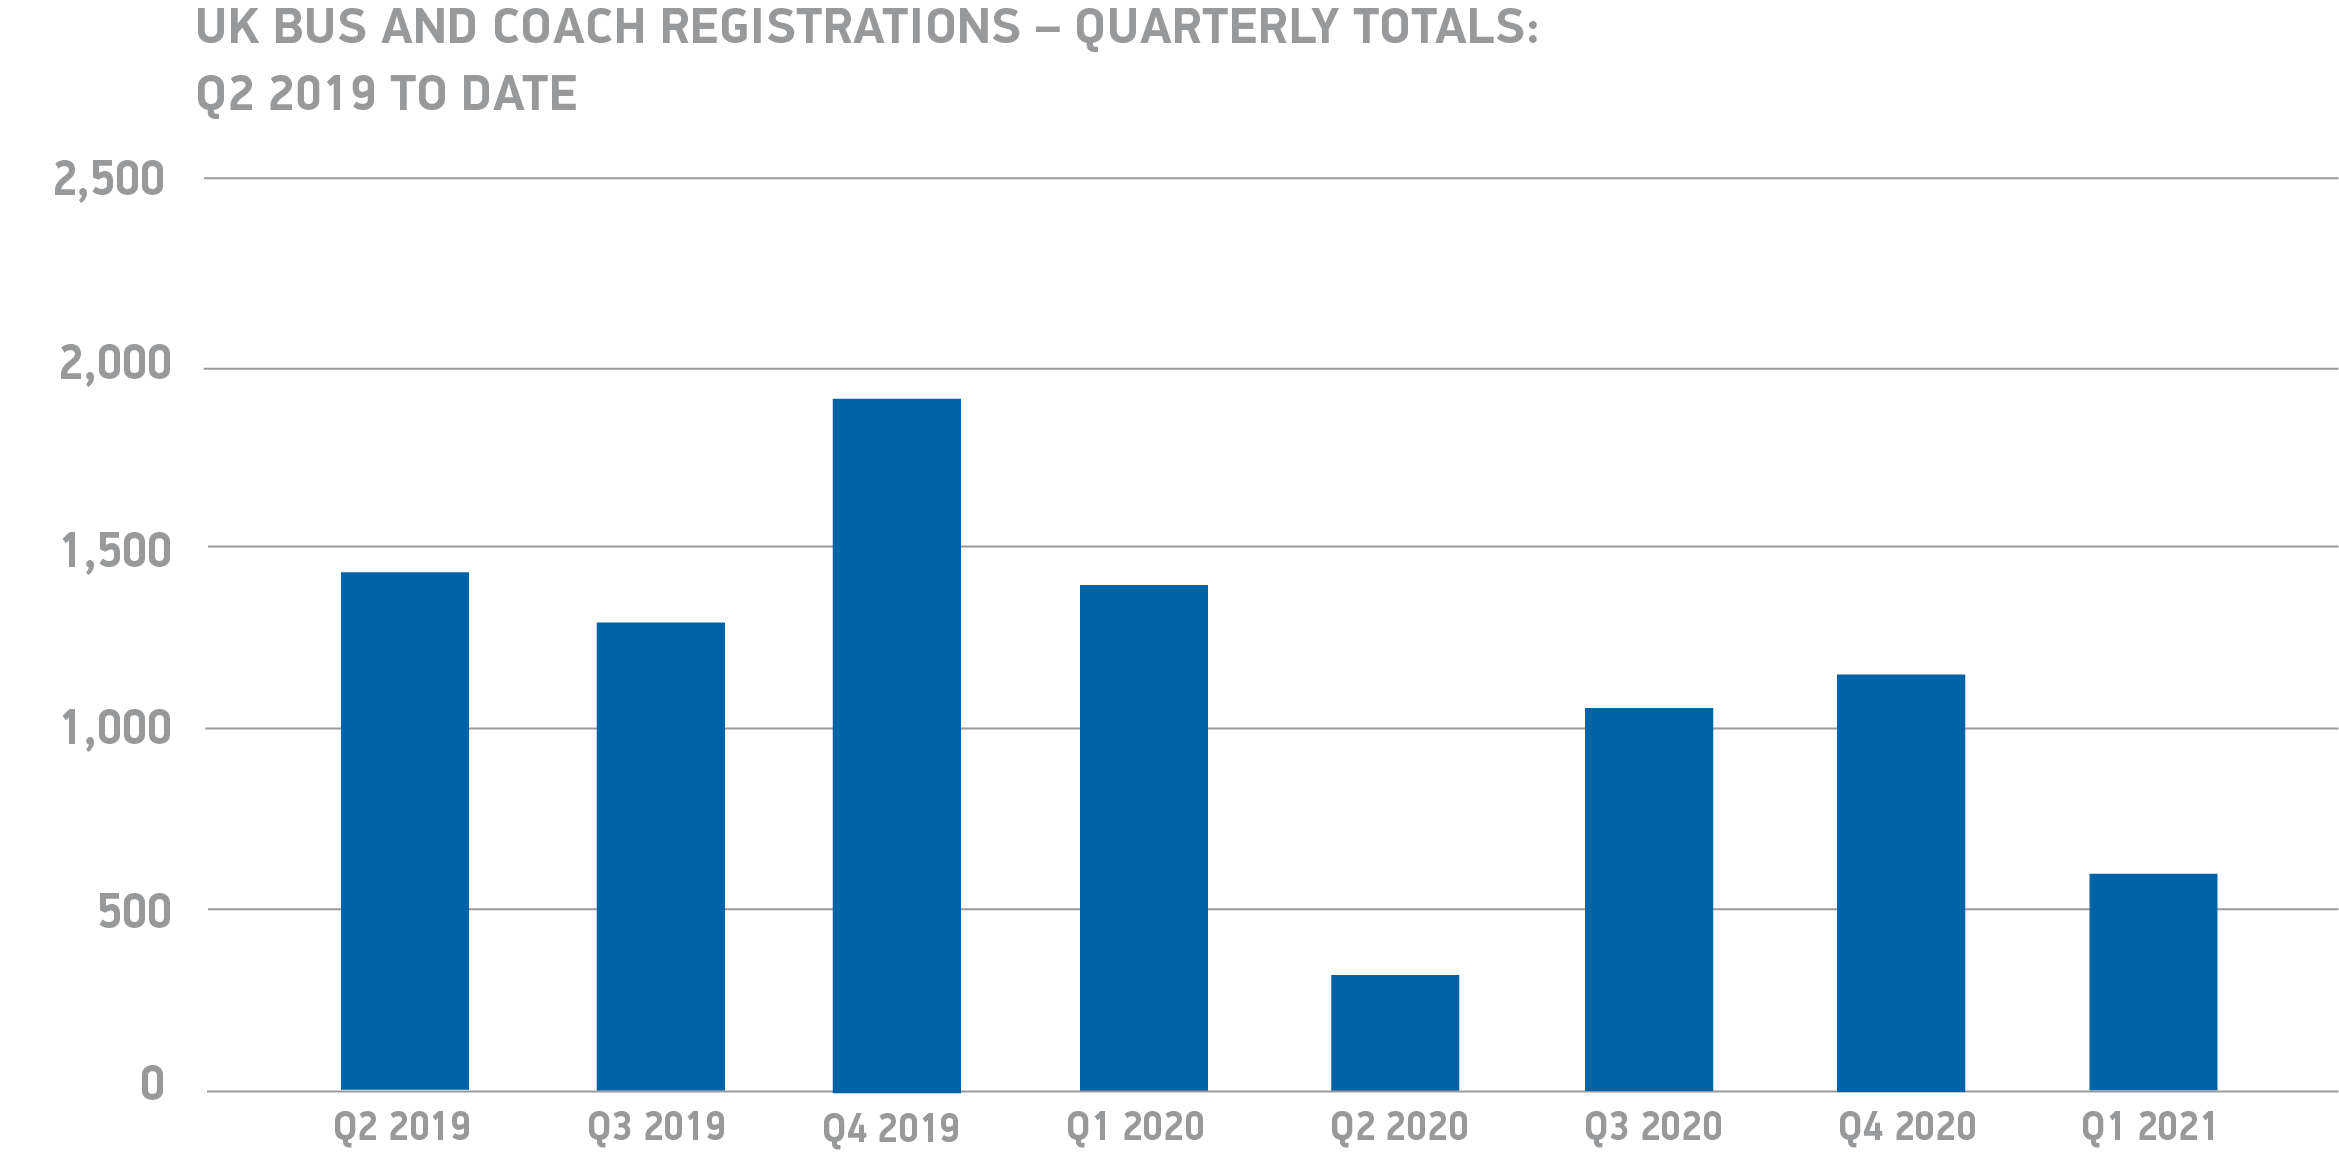 Double-digit declines in registrations